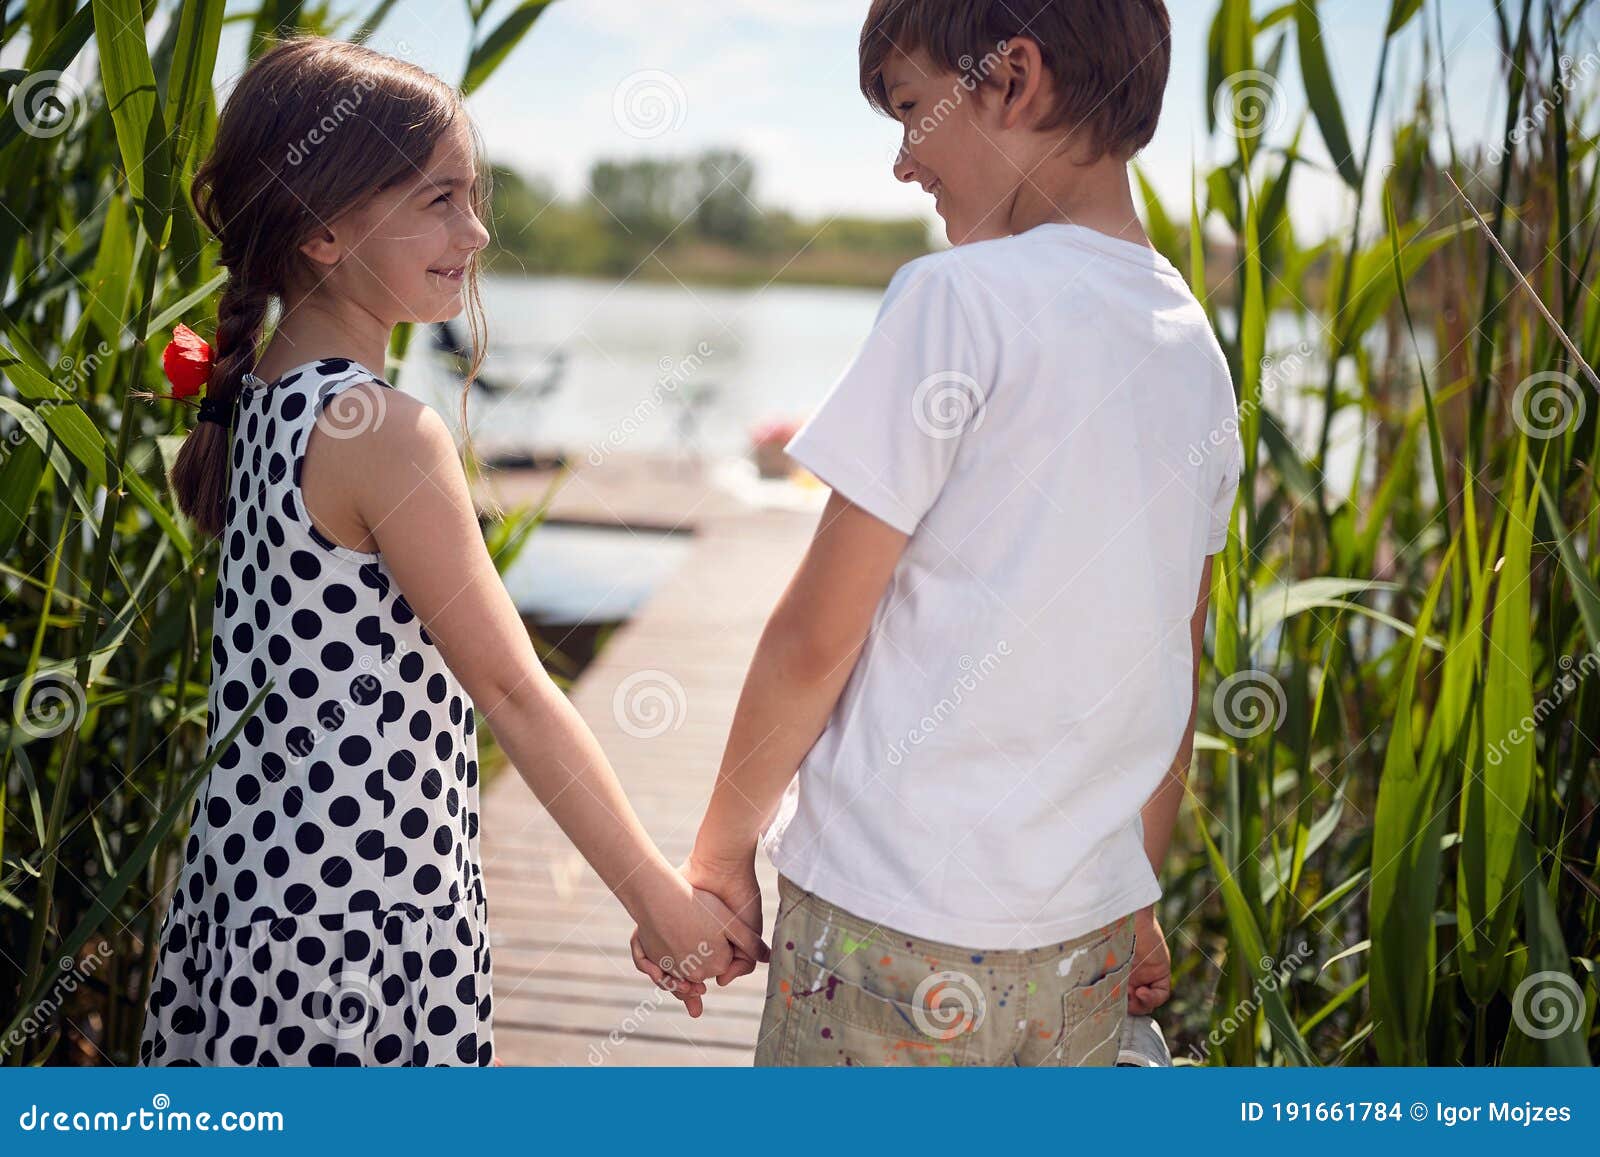 Close Up Image Of Caucasian Boy And Girl Holding Hands Walking Toward The Water Stock Photo Image Of Children Amusing